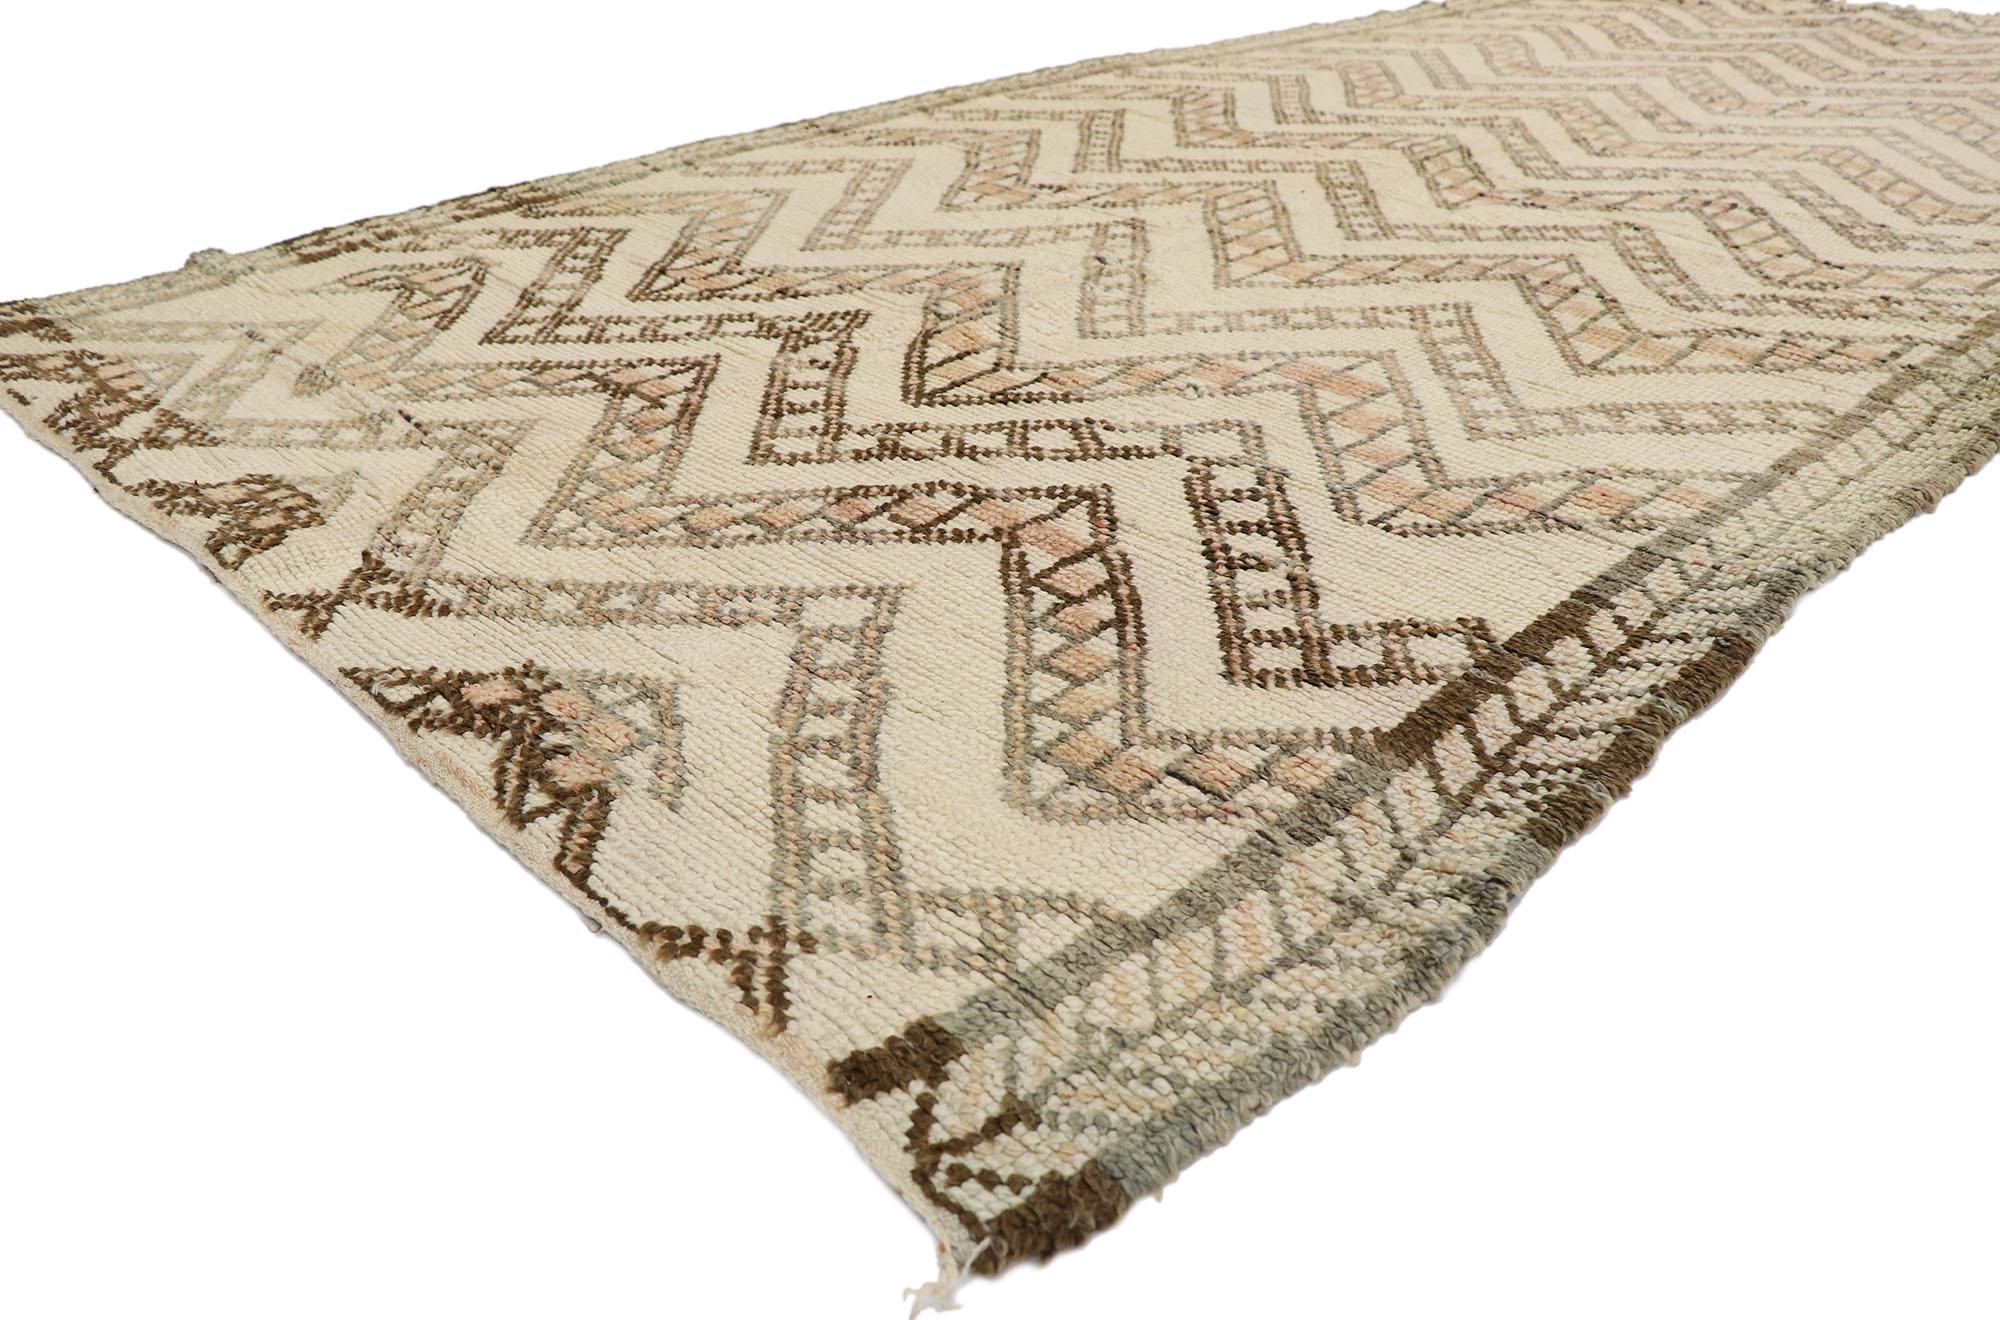 21383 Vintage Berber Beni Ourain Moroccan rug with Mid-Century Modern Style 05'07 x 11'09. With its simplicity, incredible detail and texture, this hand knotted wool vintage Berber Beni Ourain Moroccan rug is a captivating vision of woven beauty. It